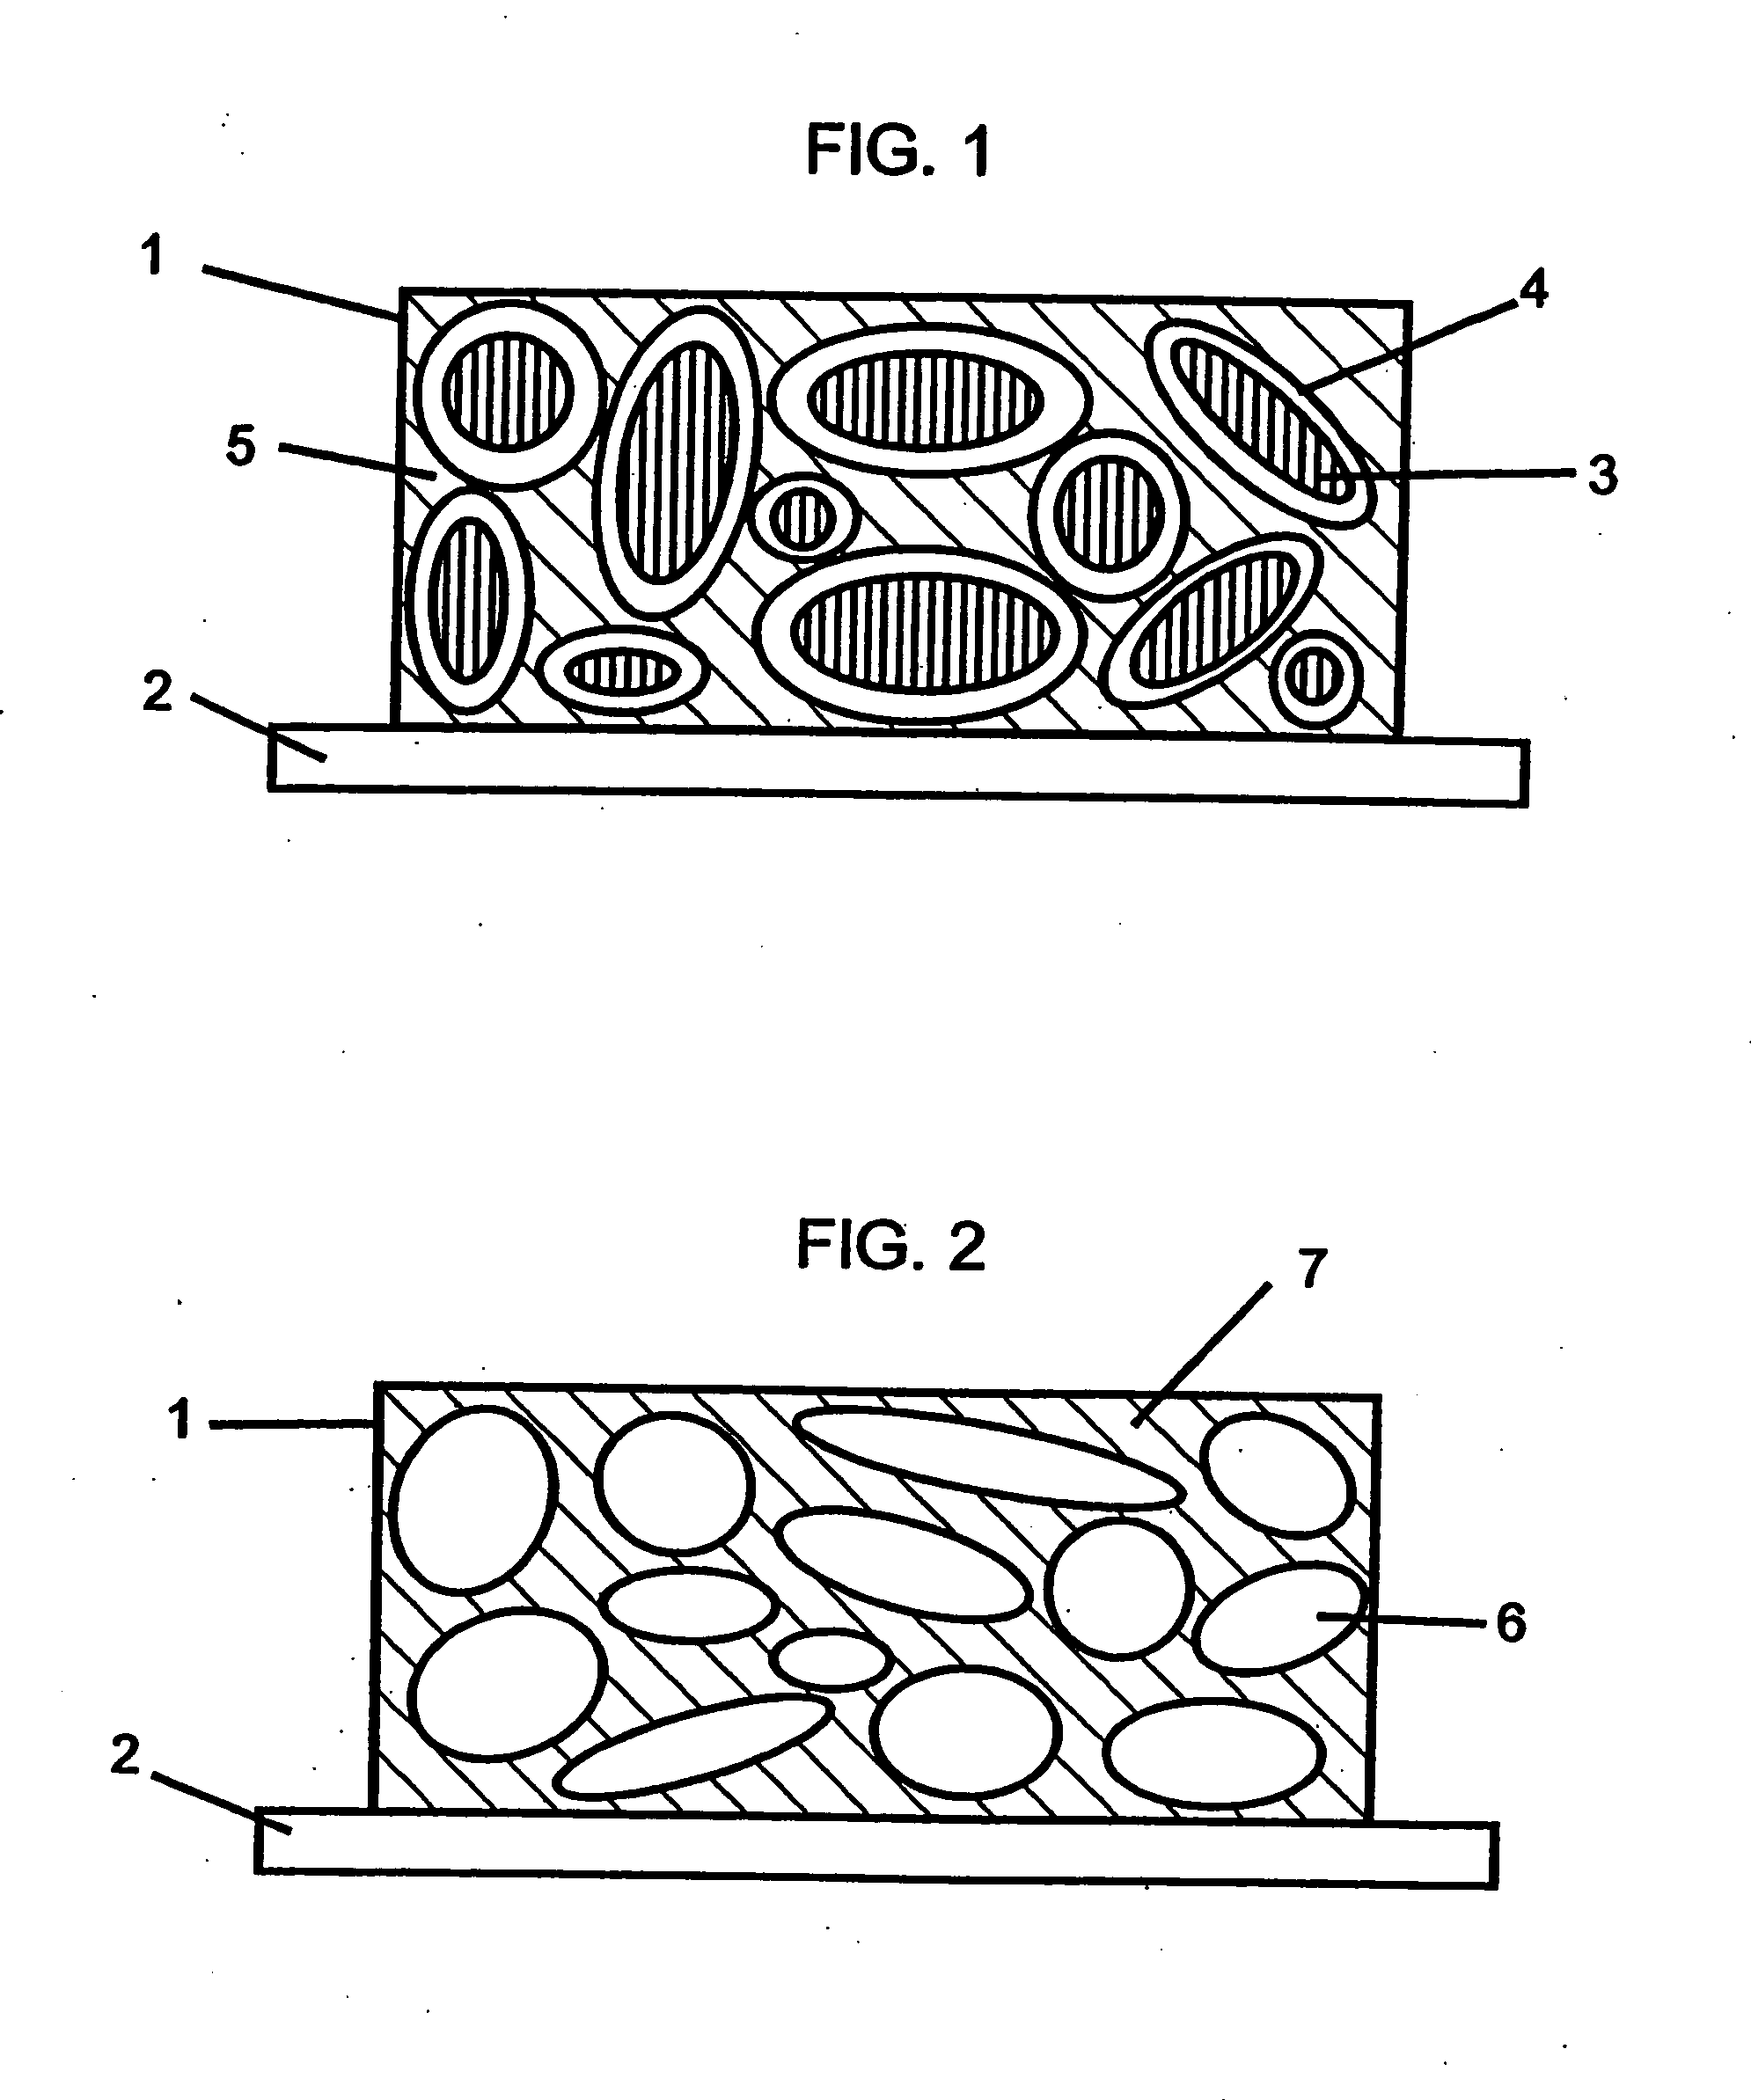 Novel composite cathodes, electrochemical cells comprising novel composite cathodes, and processes for fabricating same